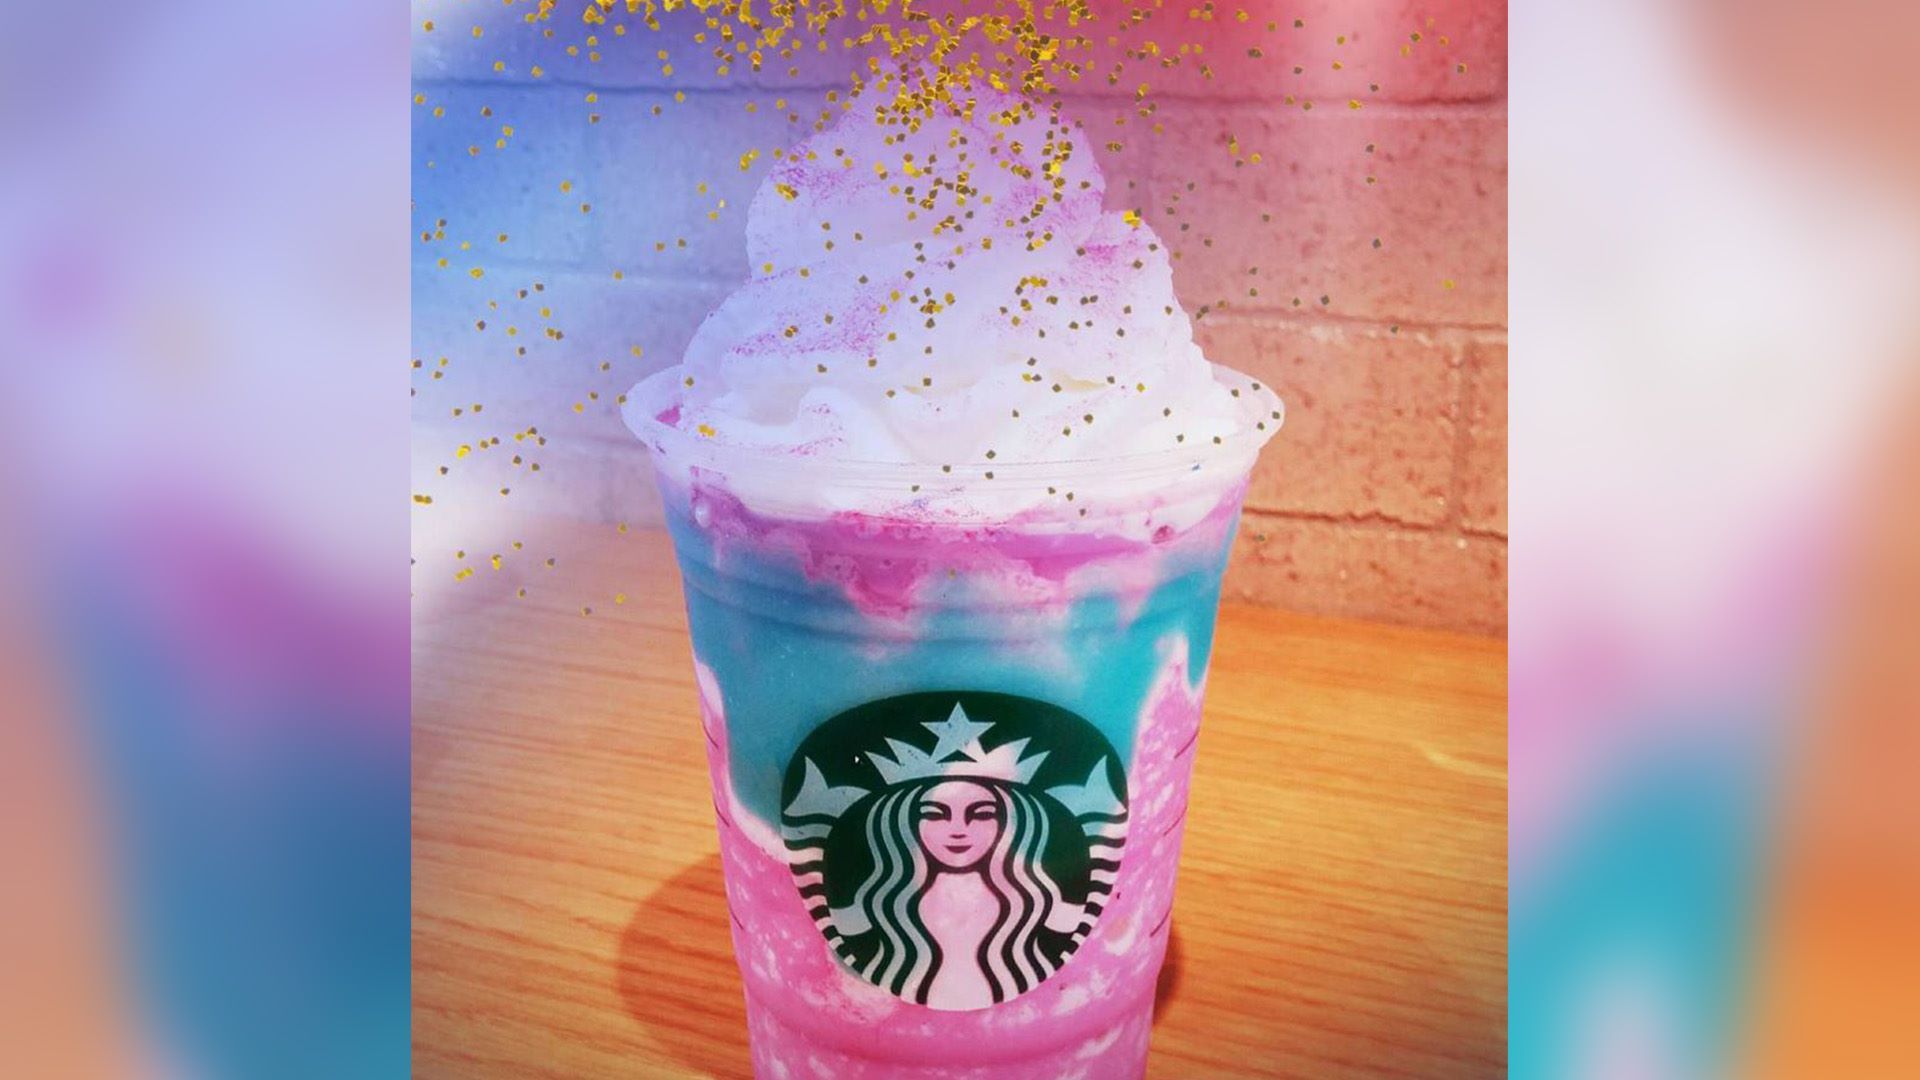 The unicorn Frappuccino is real, and it's coming to Starbucks this